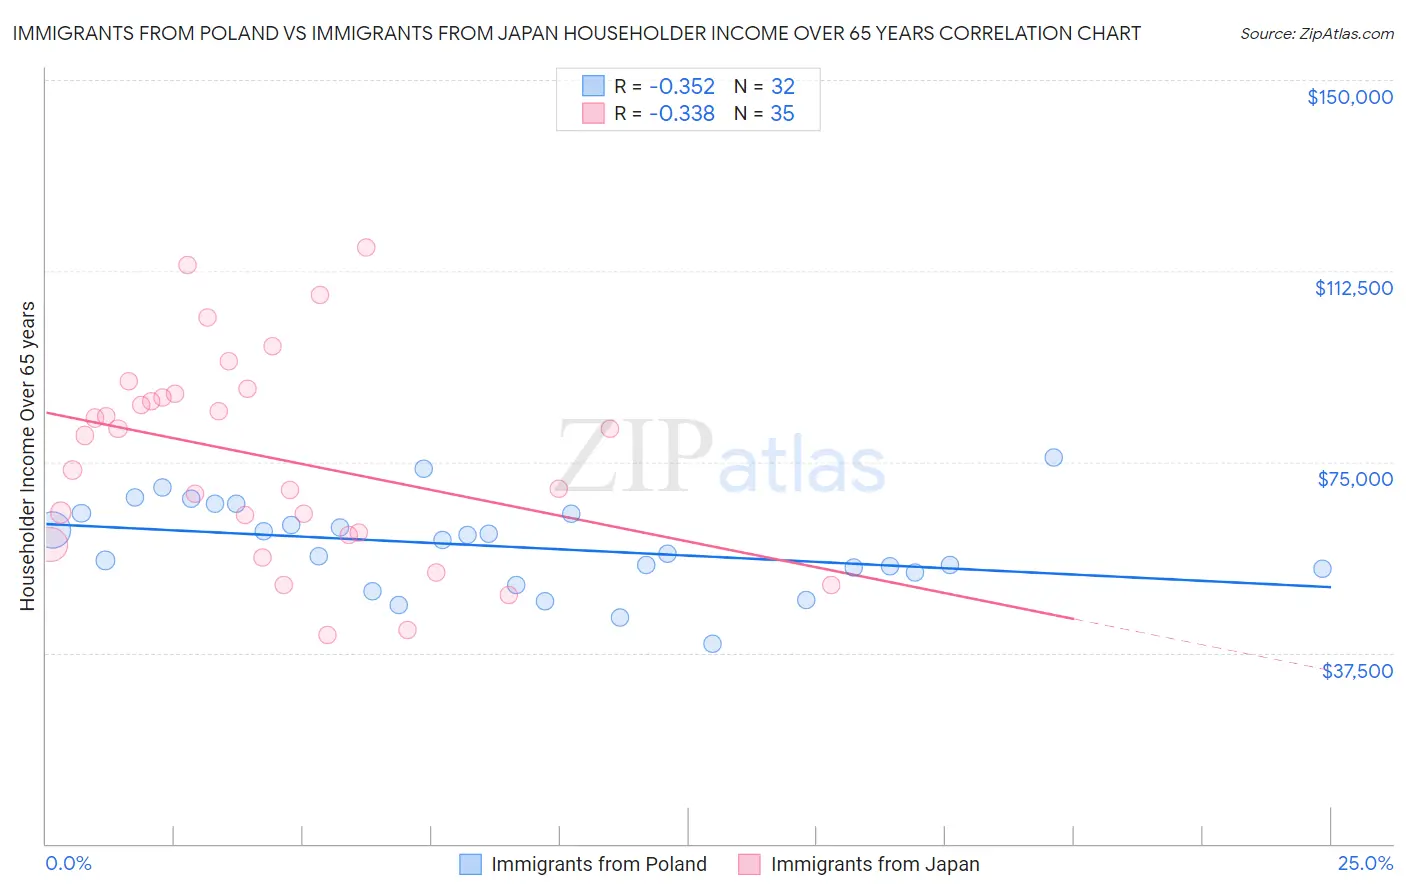 Immigrants from Poland vs Immigrants from Japan Householder Income Over 65 years